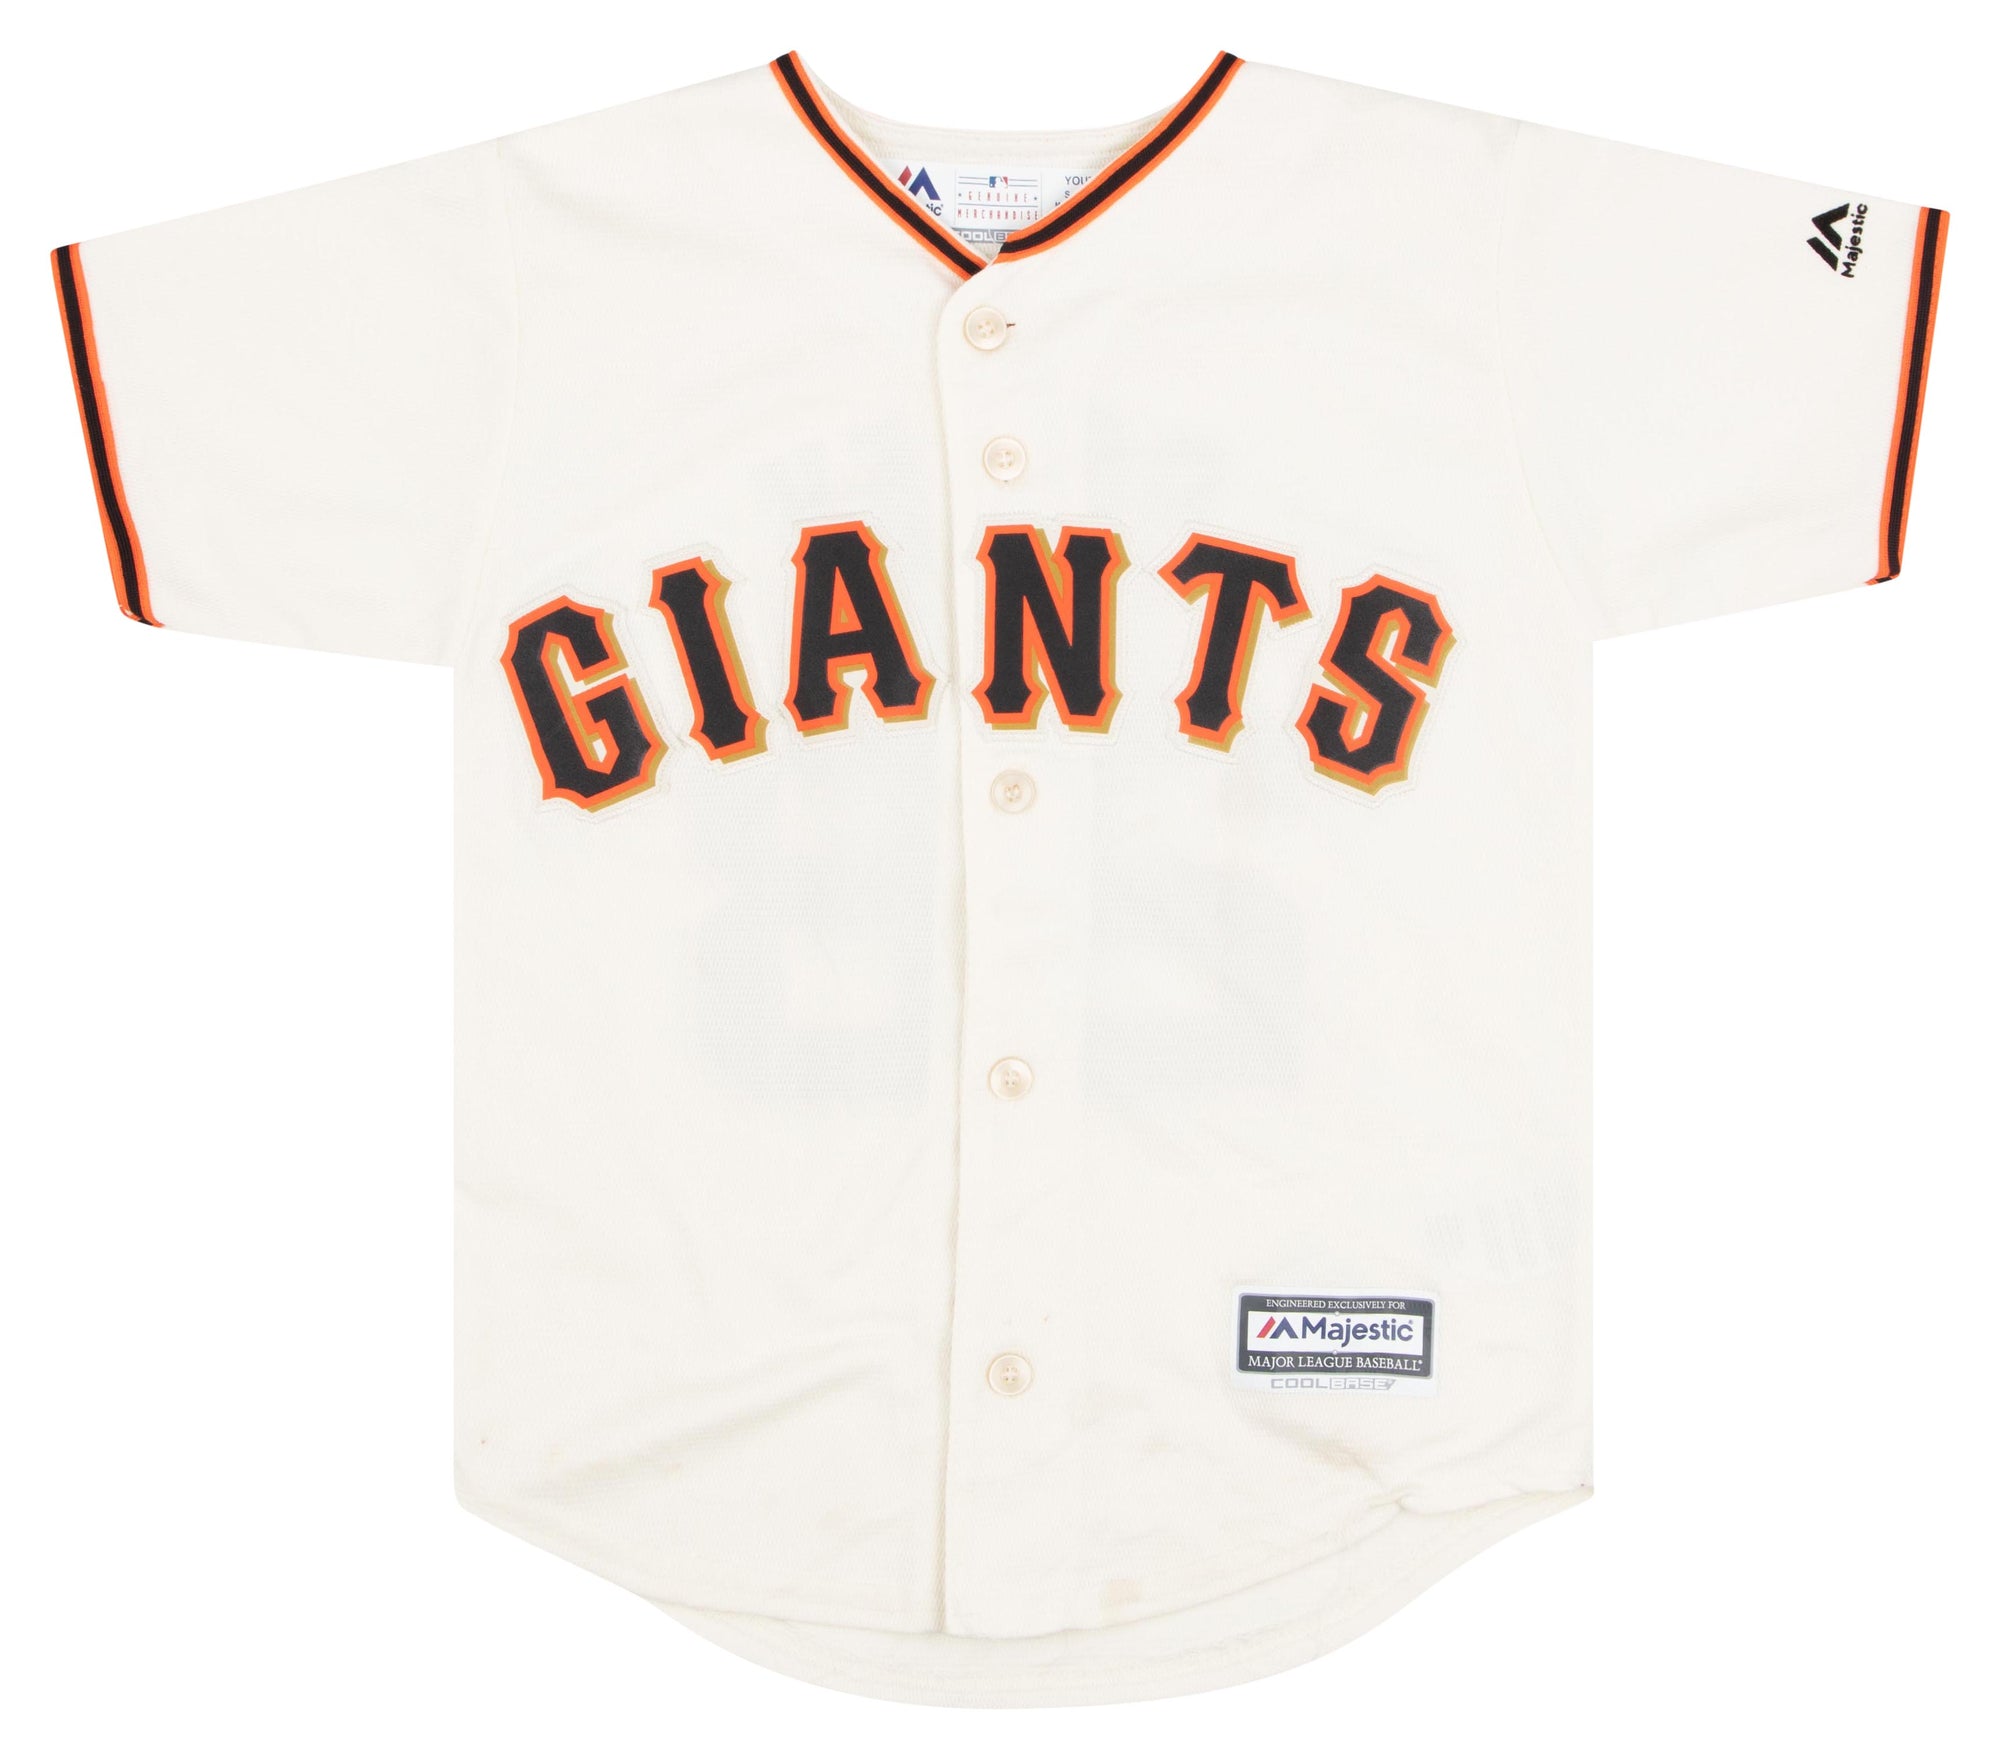 2015-18 SAN FRANCISCO GIANTS POSEY #28 MAJESTIC JERSEY (HOME) Y